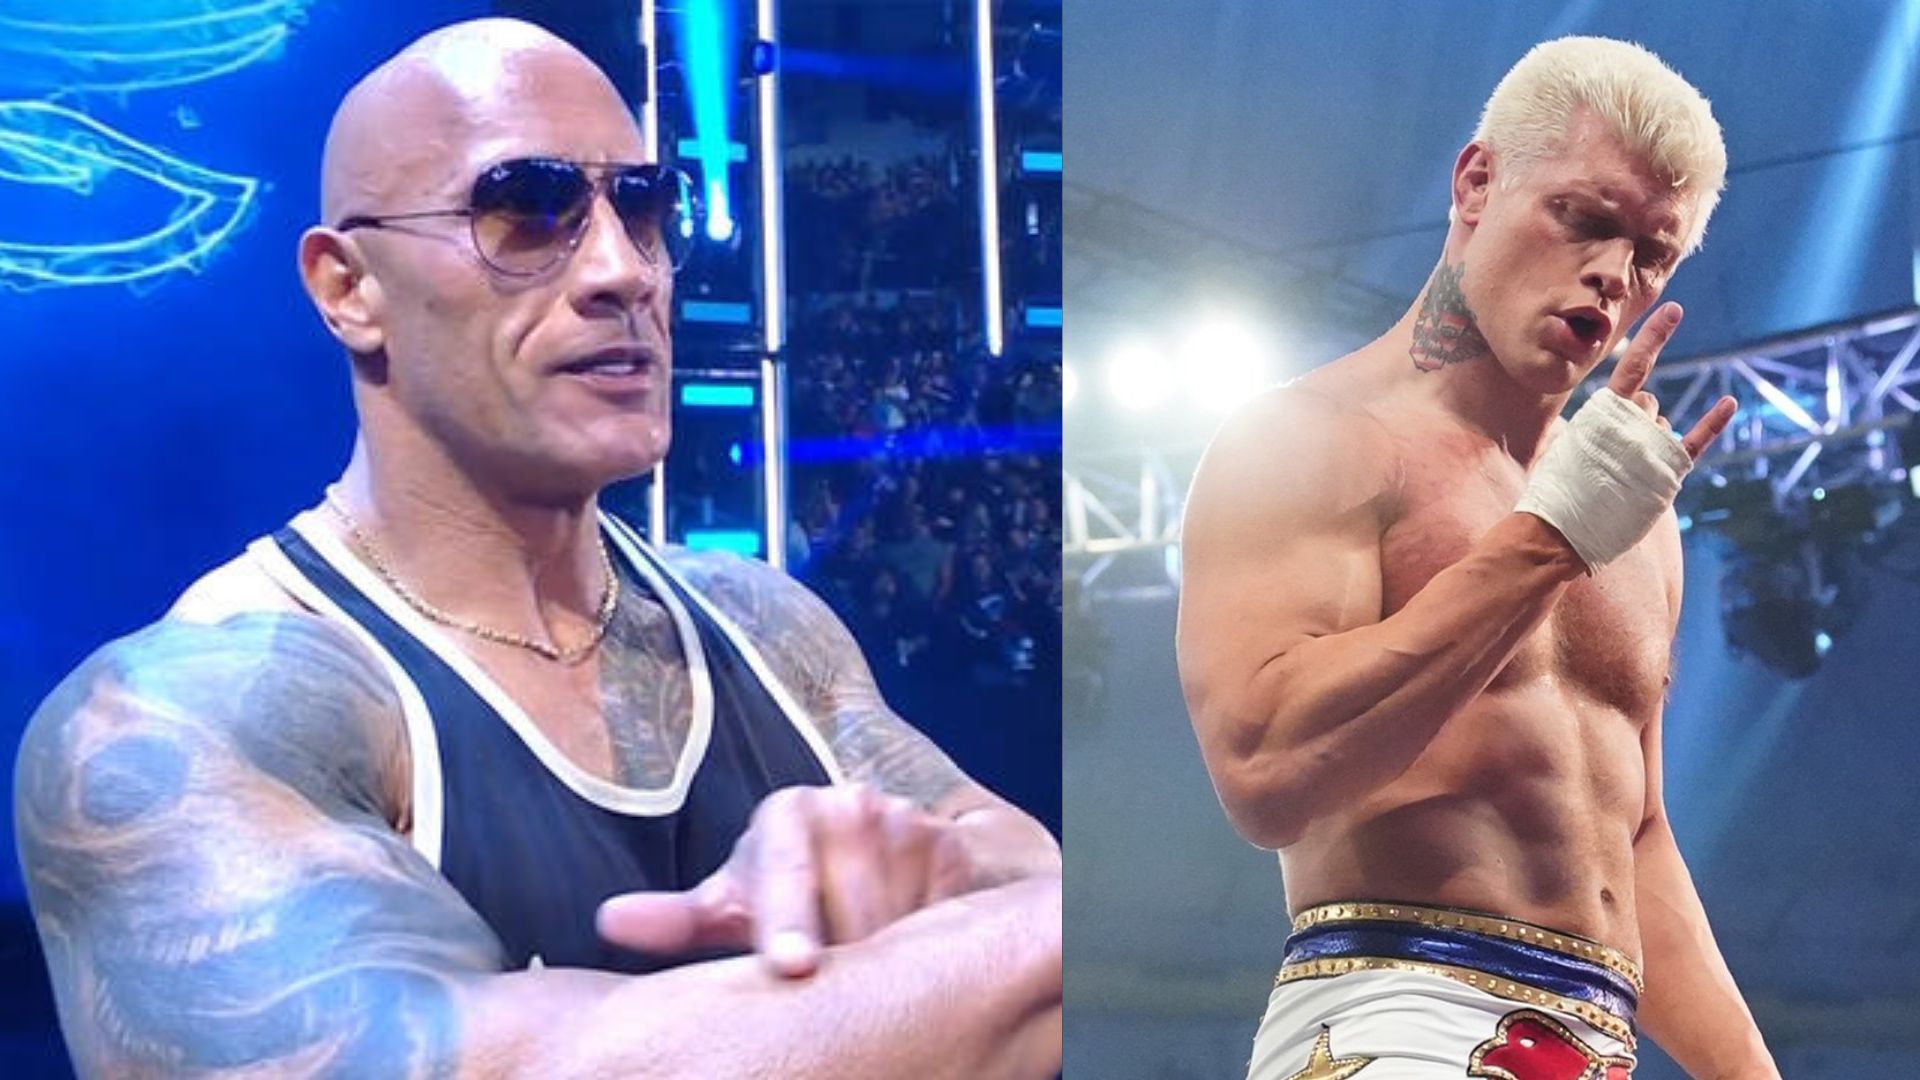 The Rock and Cody Rhodes may have an agreement in place